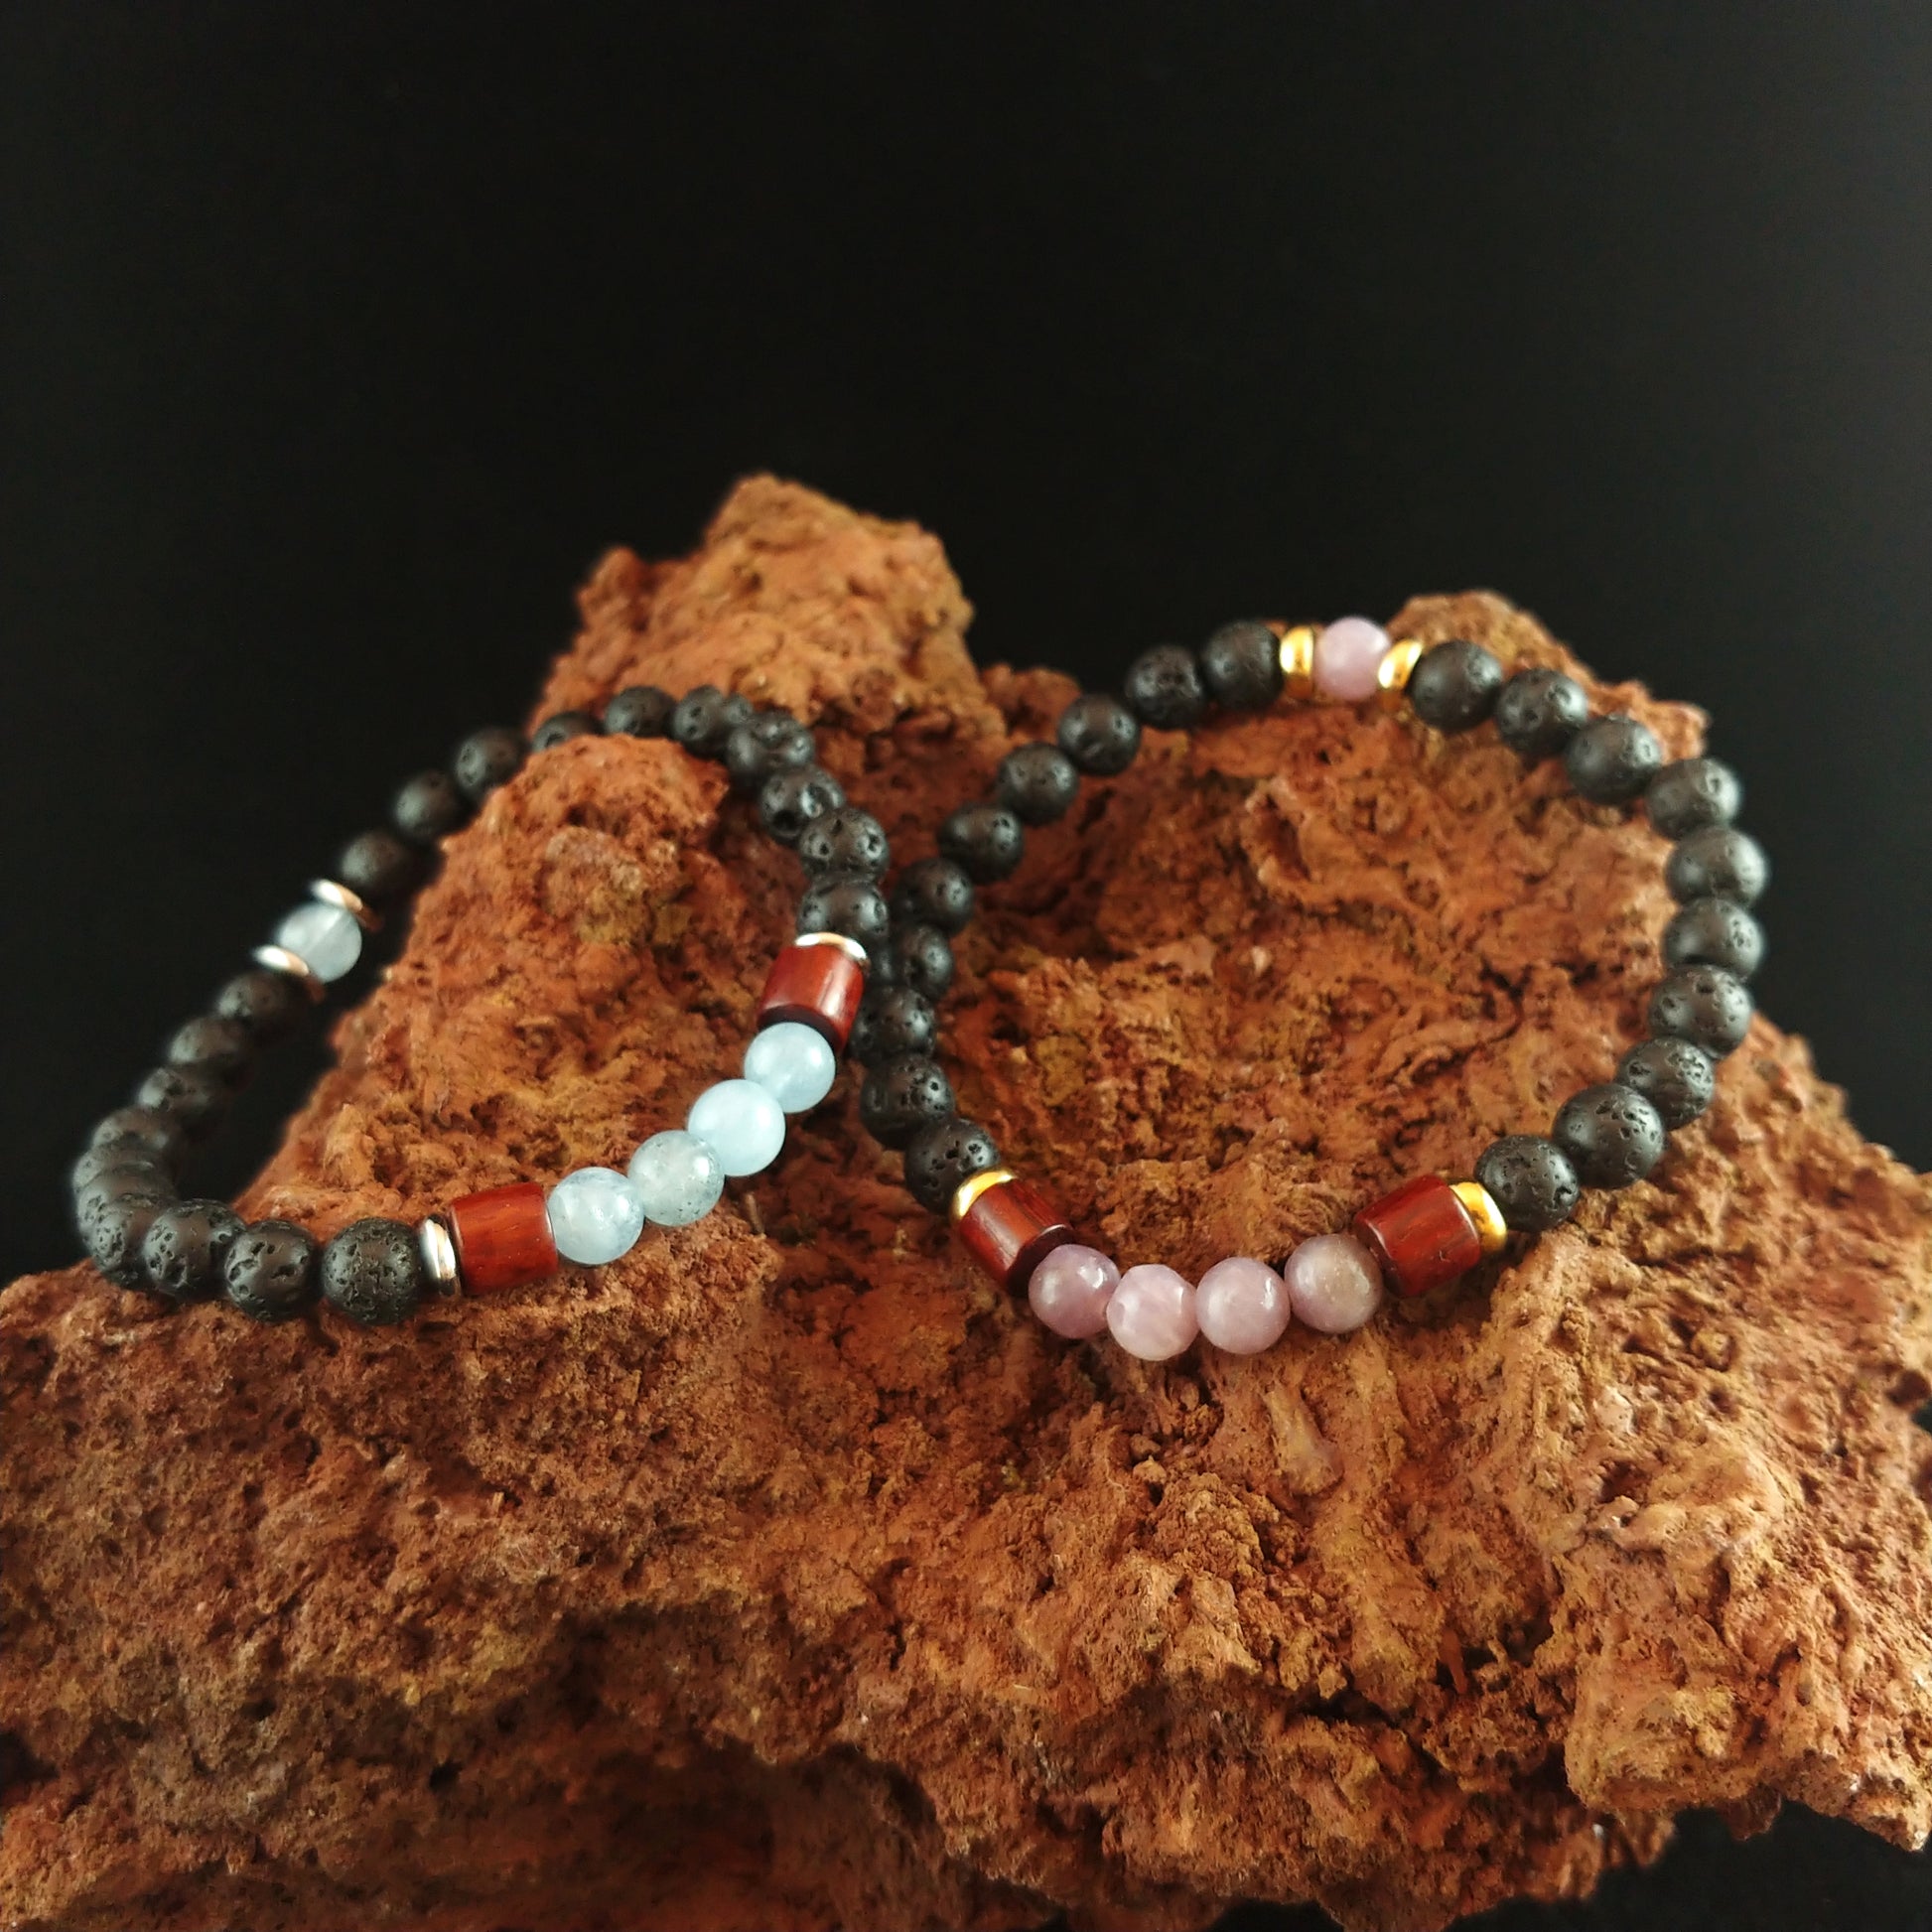 Two bracelets sitting on a red magma rock. One bracelet has bright blue aquamarine stones mixed with lava stones and wood and thin gold spacers. The other bracelet sits to the right and has the same golden and wooden spacers with lava and bright pink Aquamarine stones.